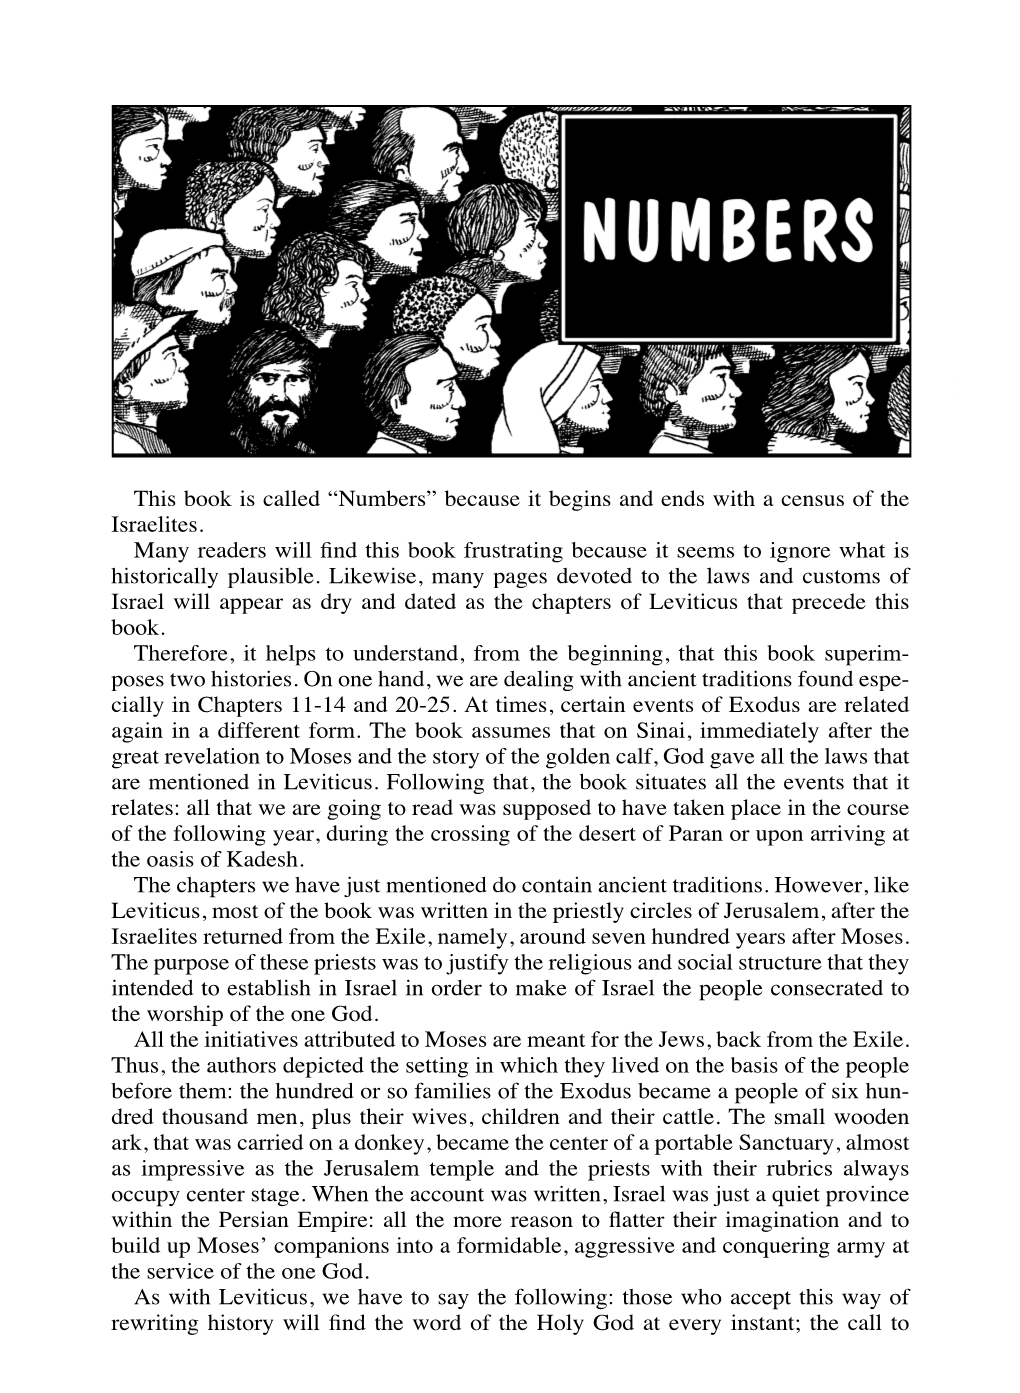 This Book Is Called “Numbers” Because It Begins and Ends with a Census of the Israelites